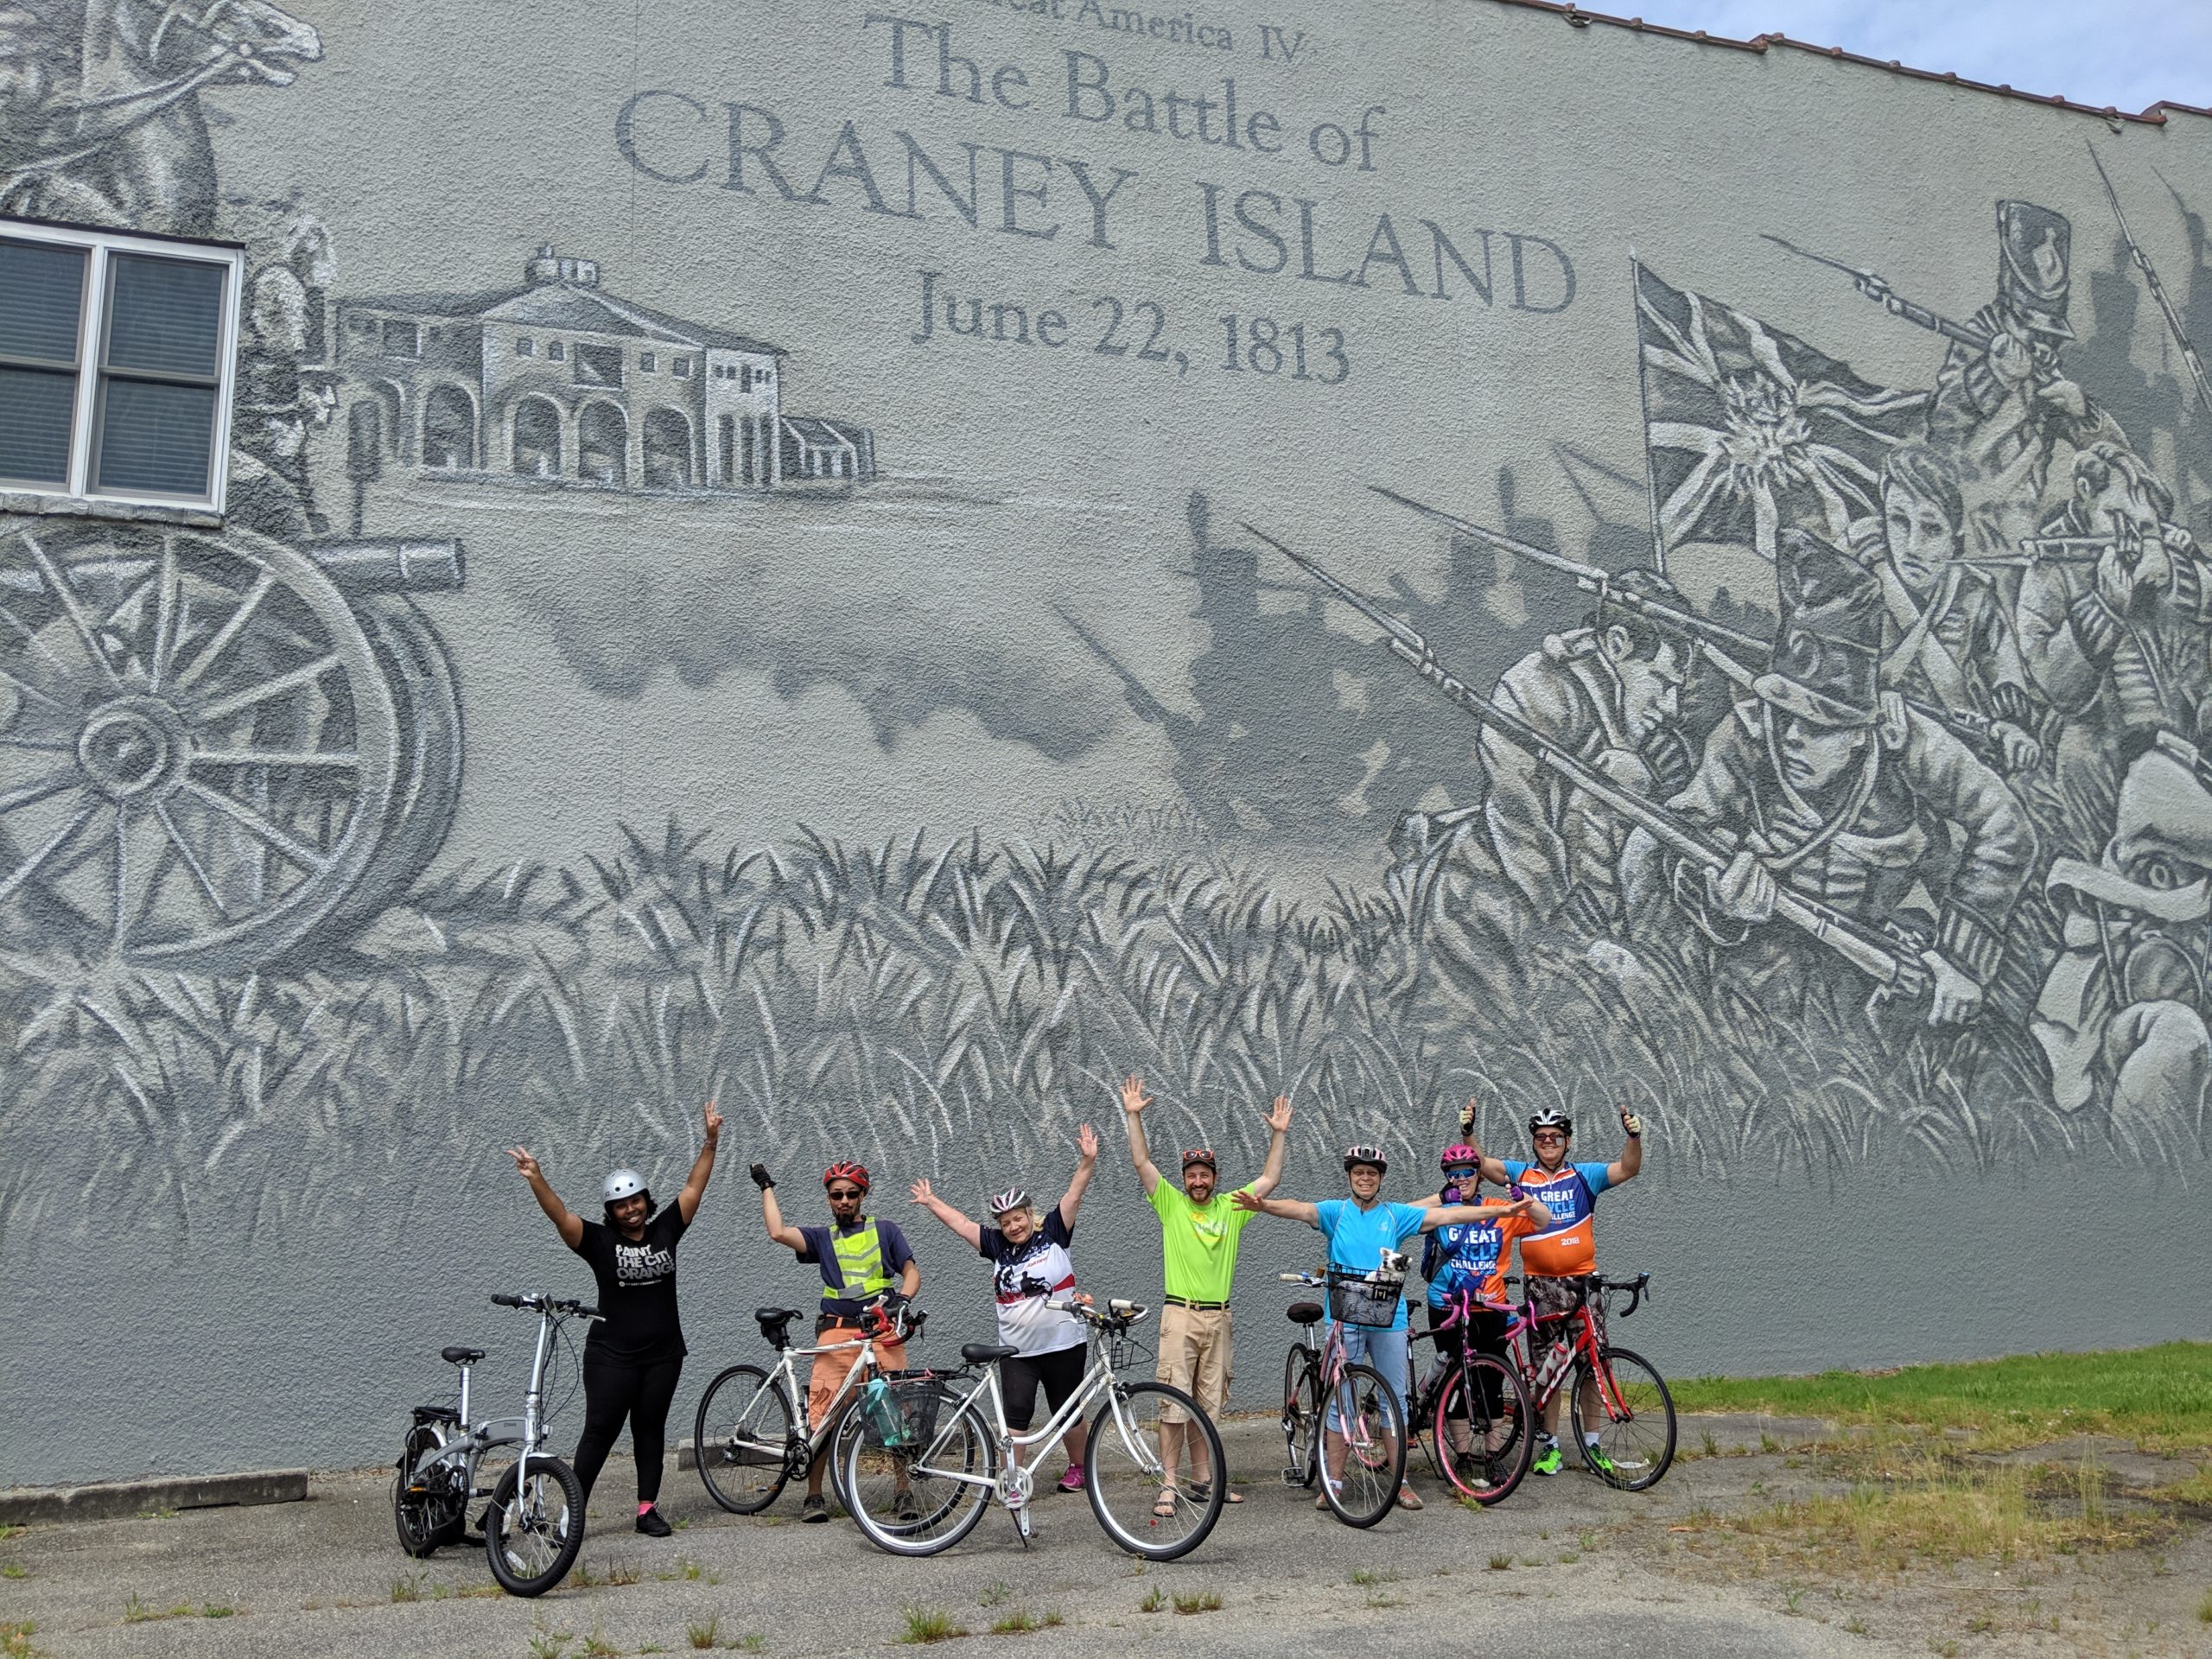 Bikers at the Craney Island Mural